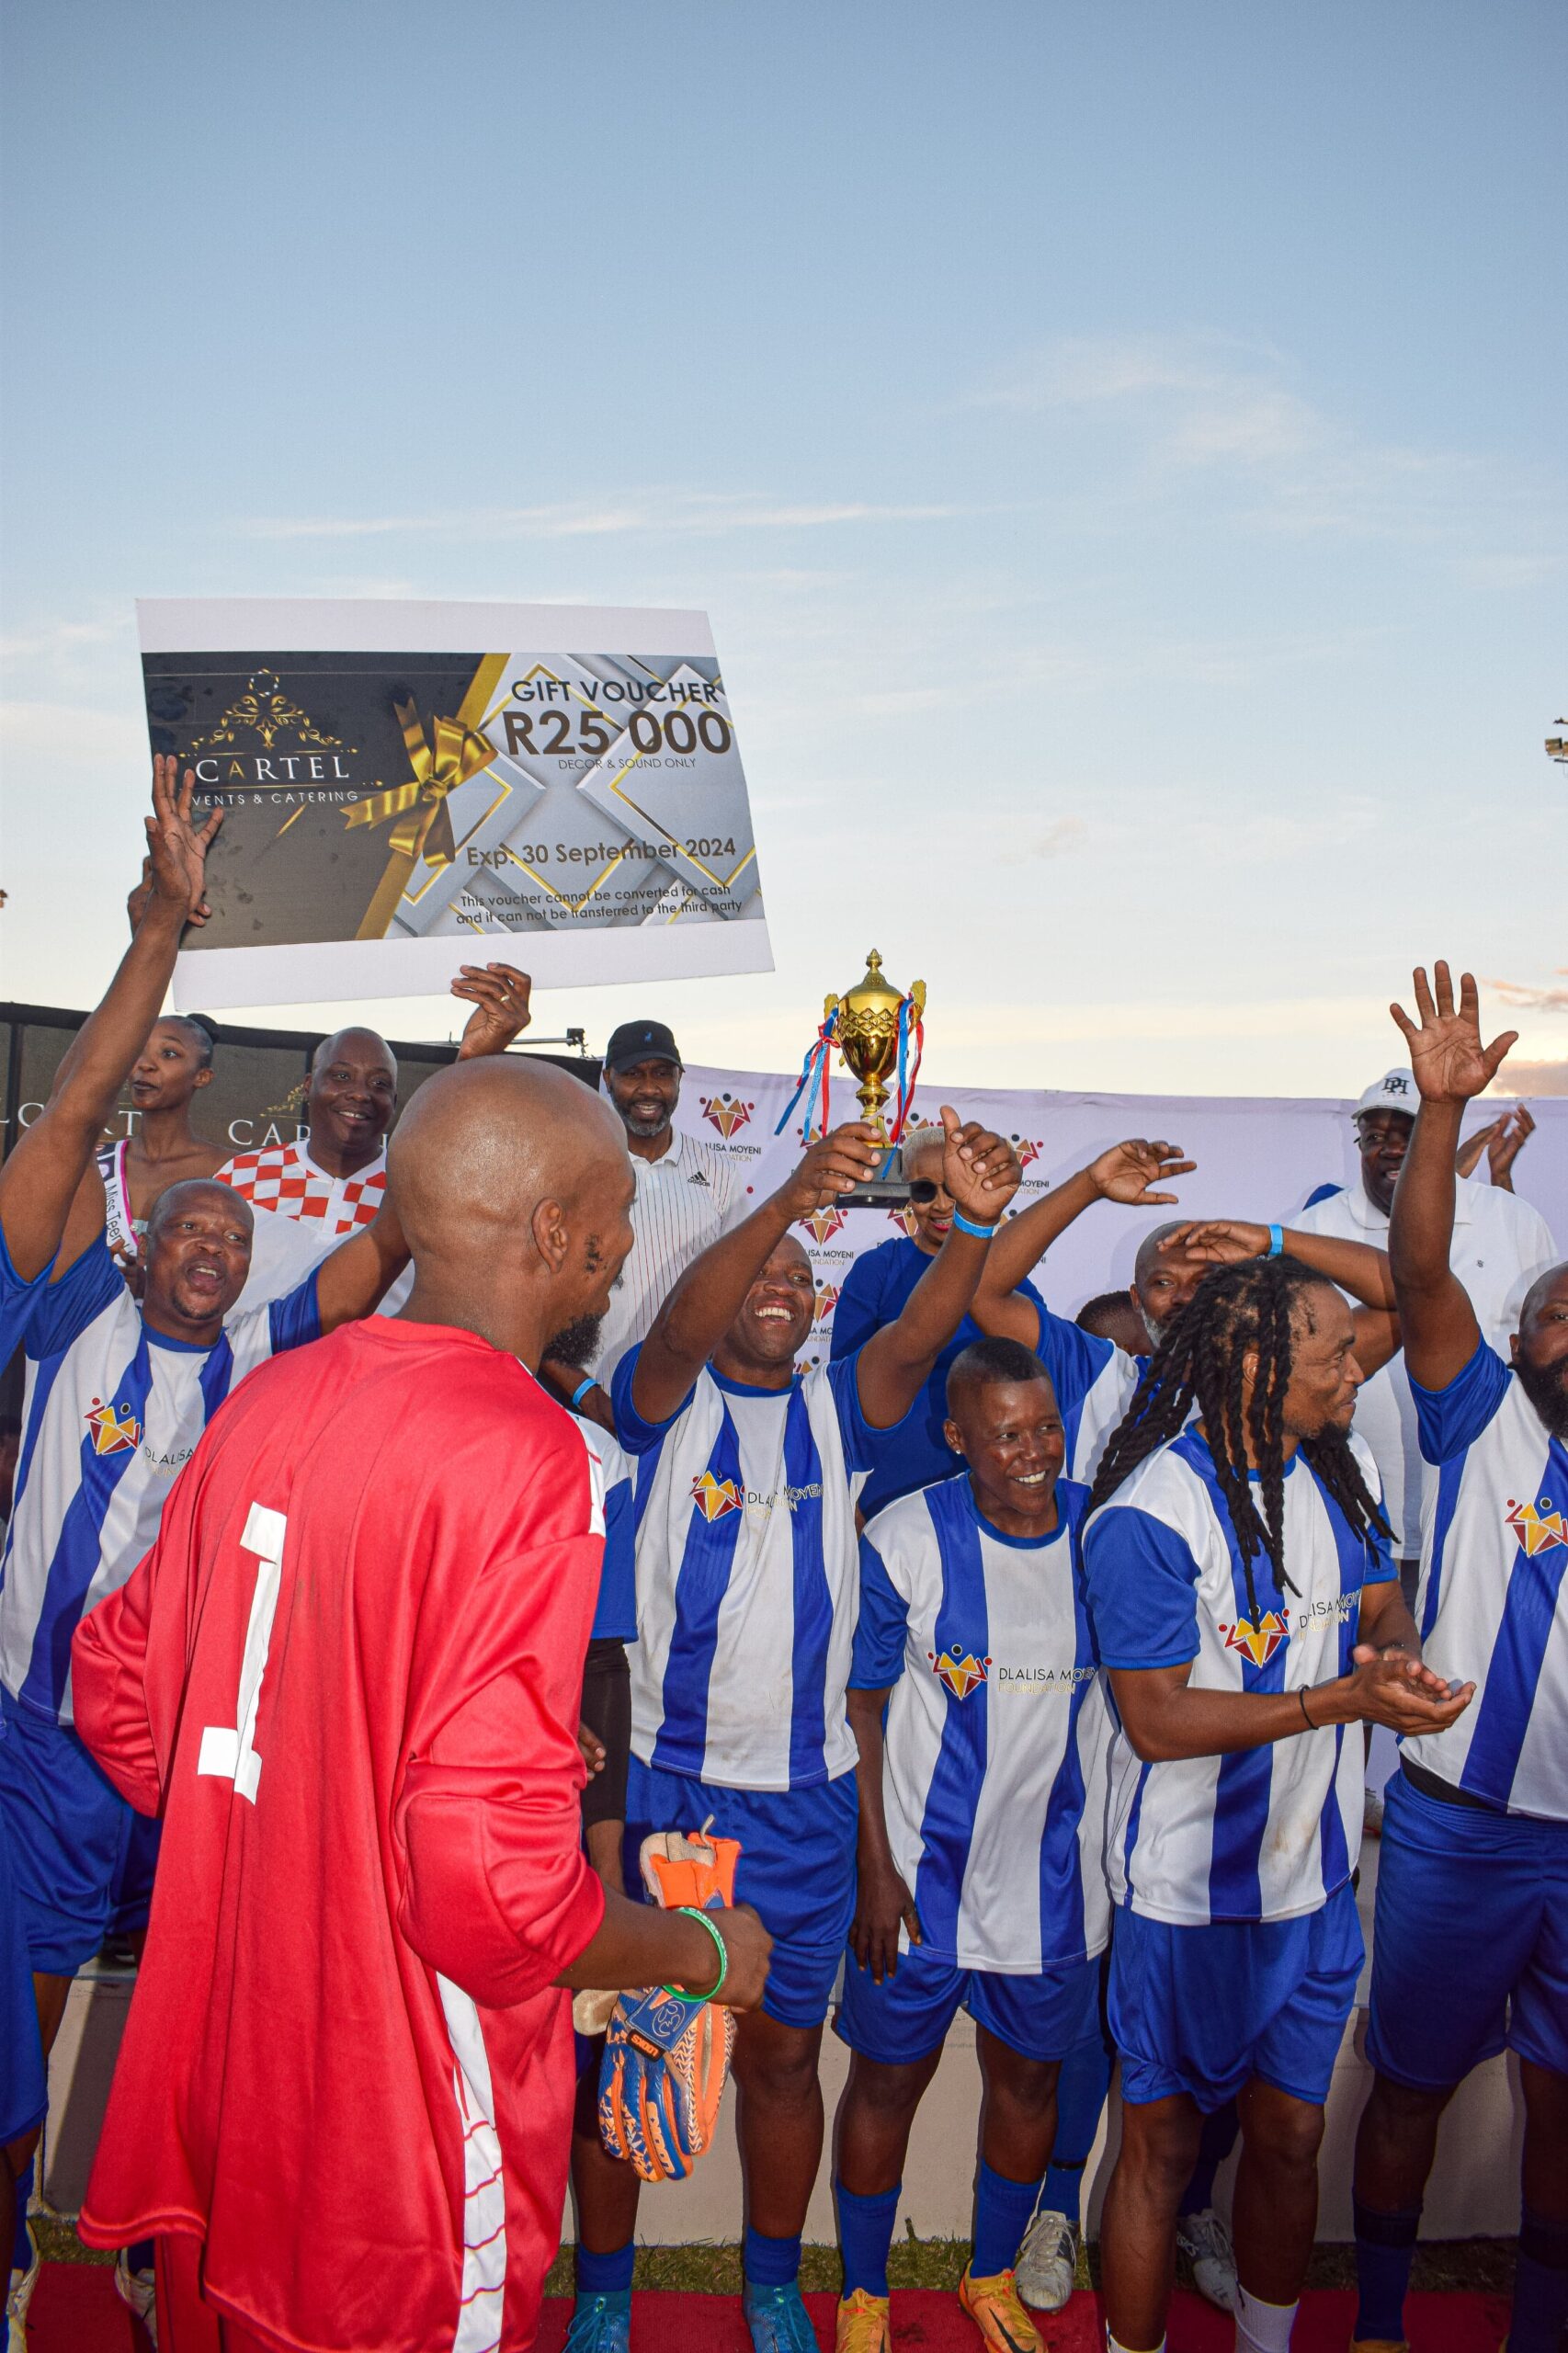 Members of the Themba Mnguni's team that won the legends' match posing with the cheque of their prize money photo by Peter Mothiba